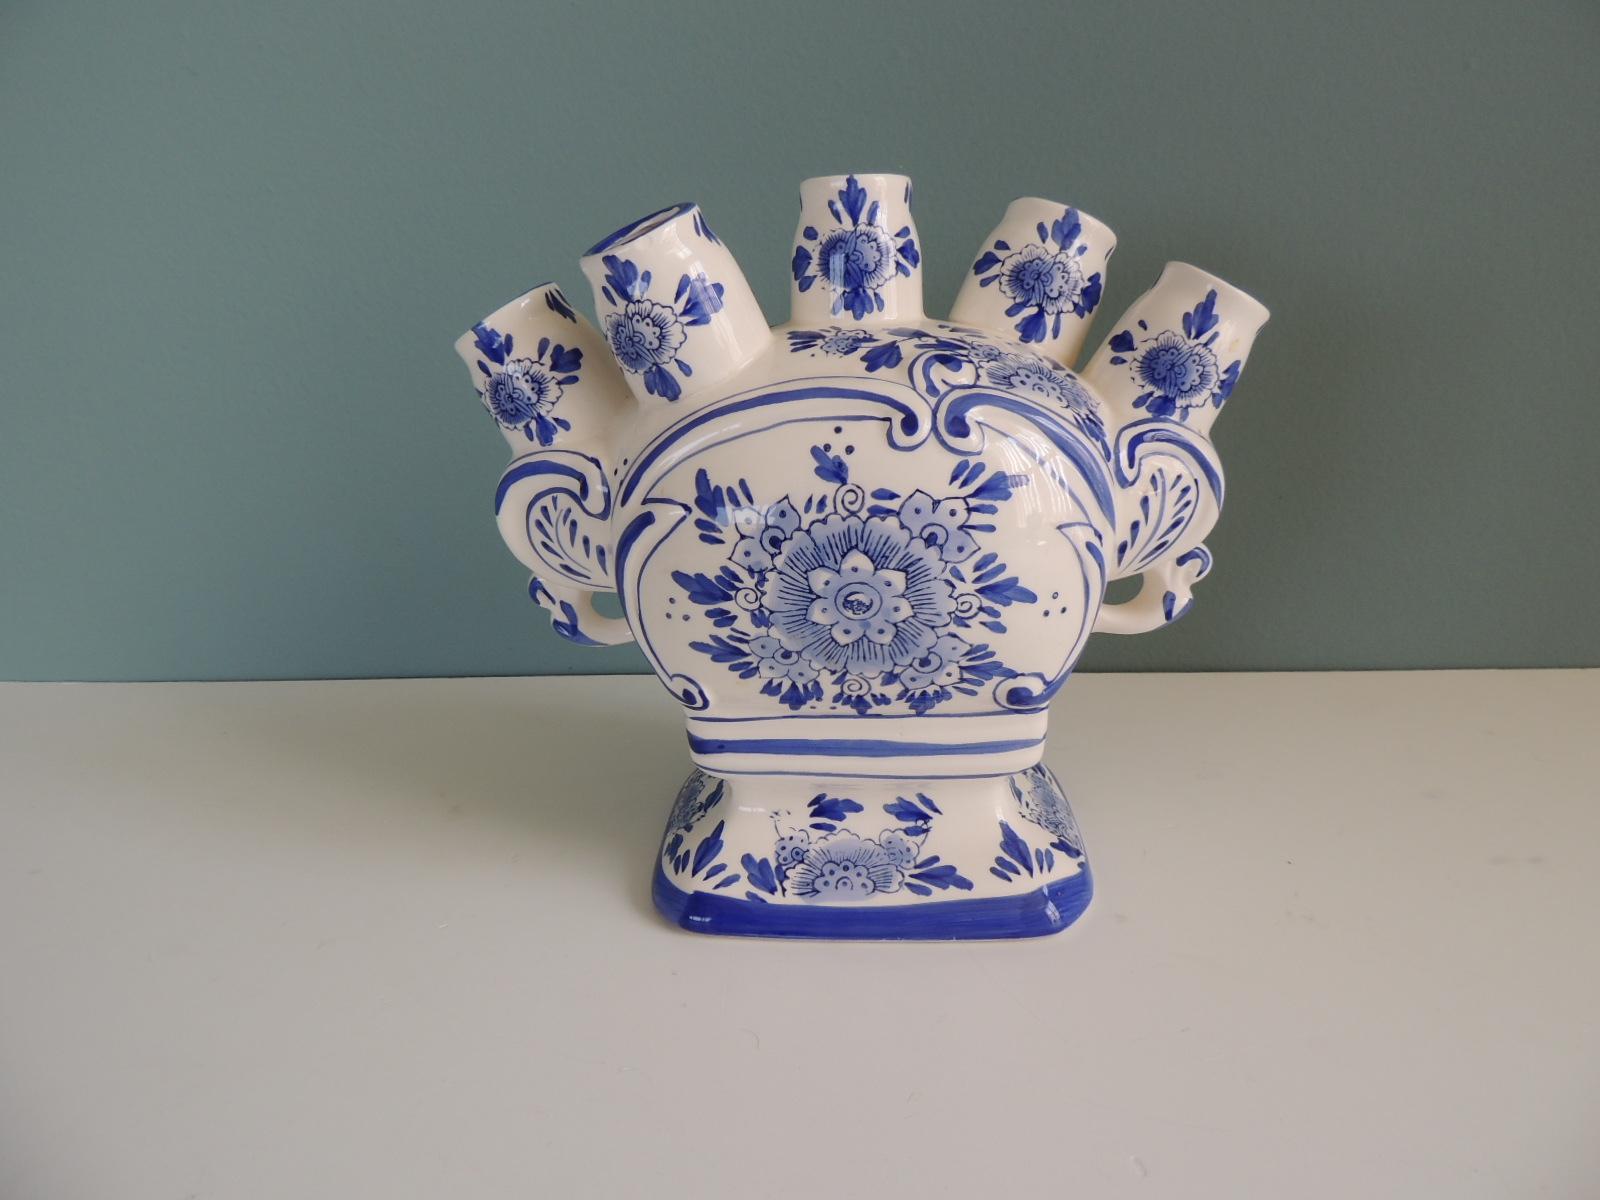 Hand-Crafted Blue and White Ceramic Hand Painted Tulipiere Vase